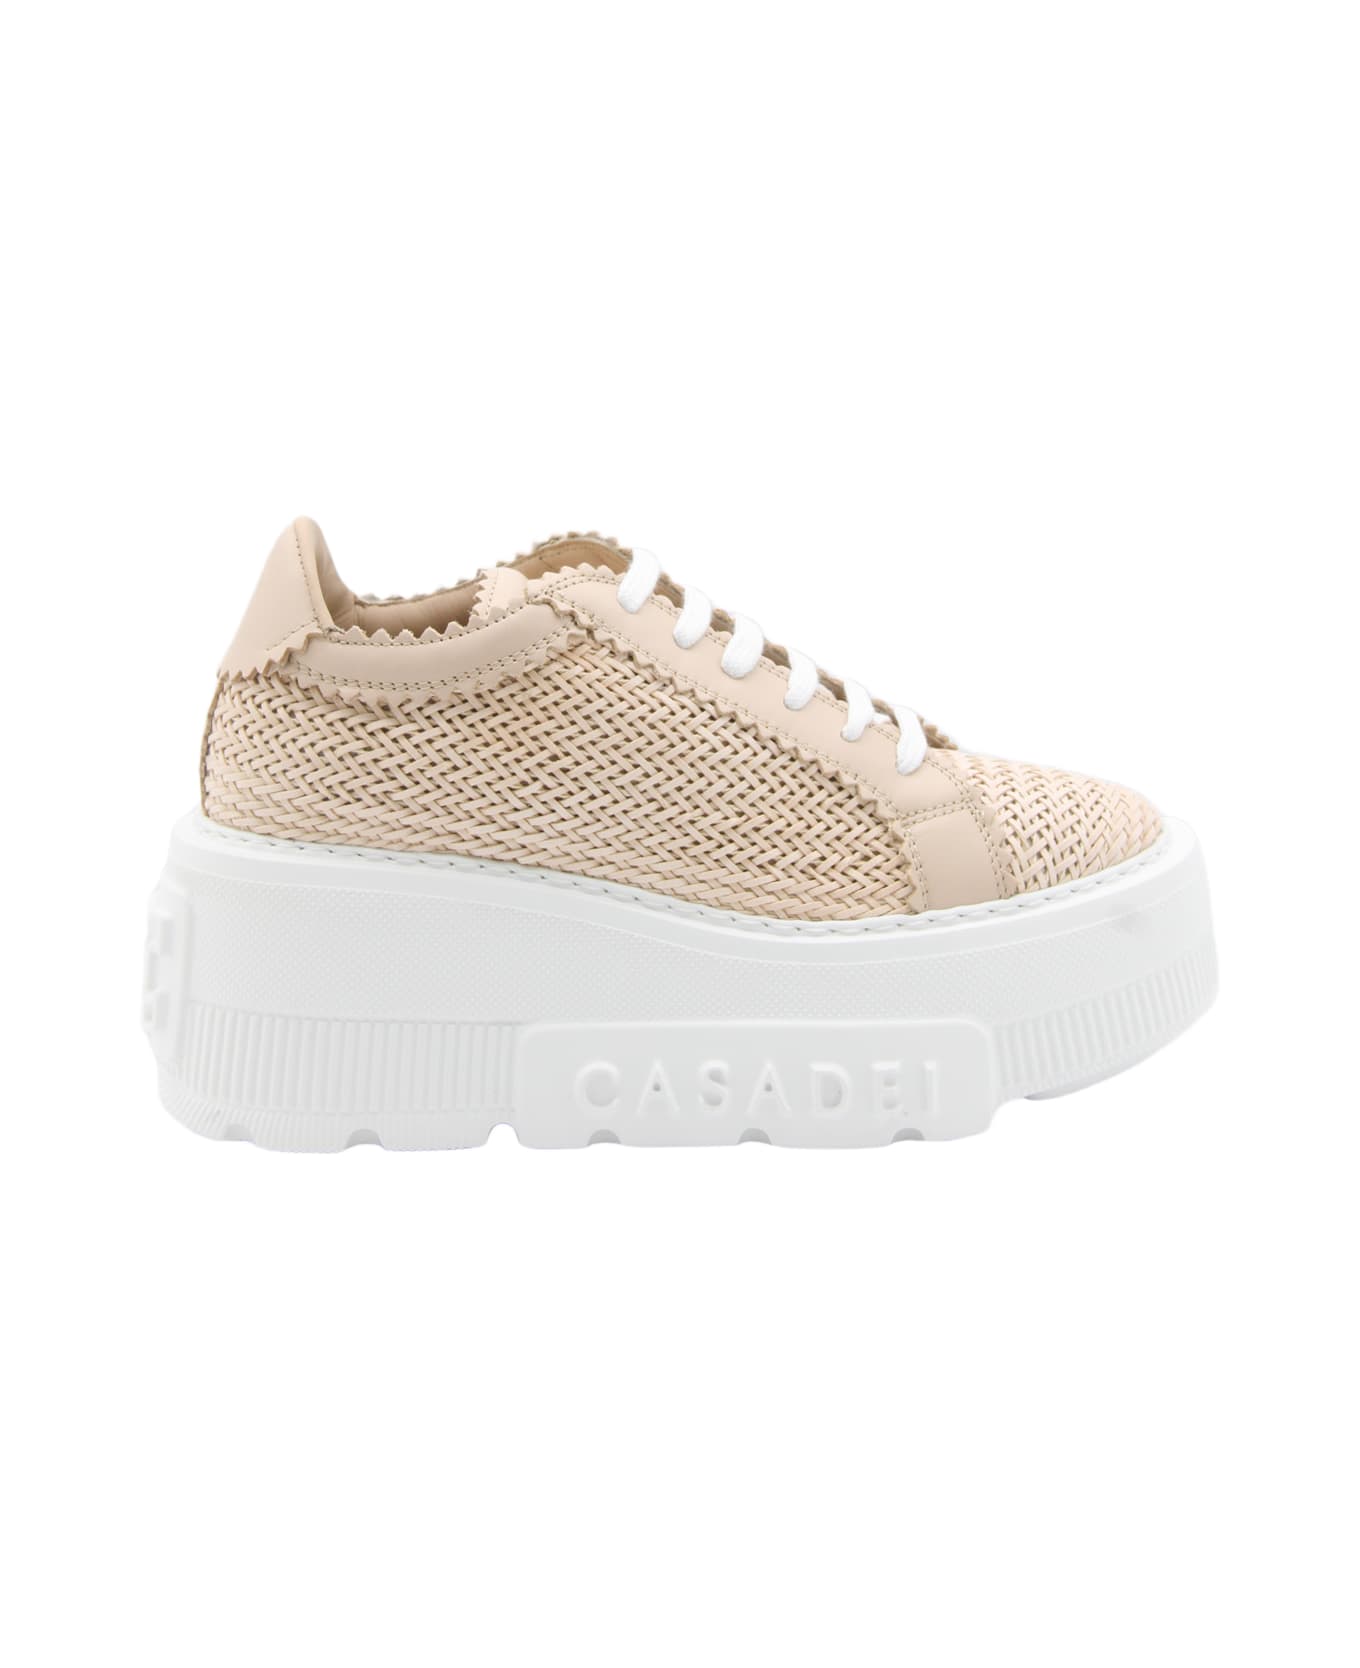 Casadei Light Pink And White Leather Sneakers - SPIAGGIA ROSA